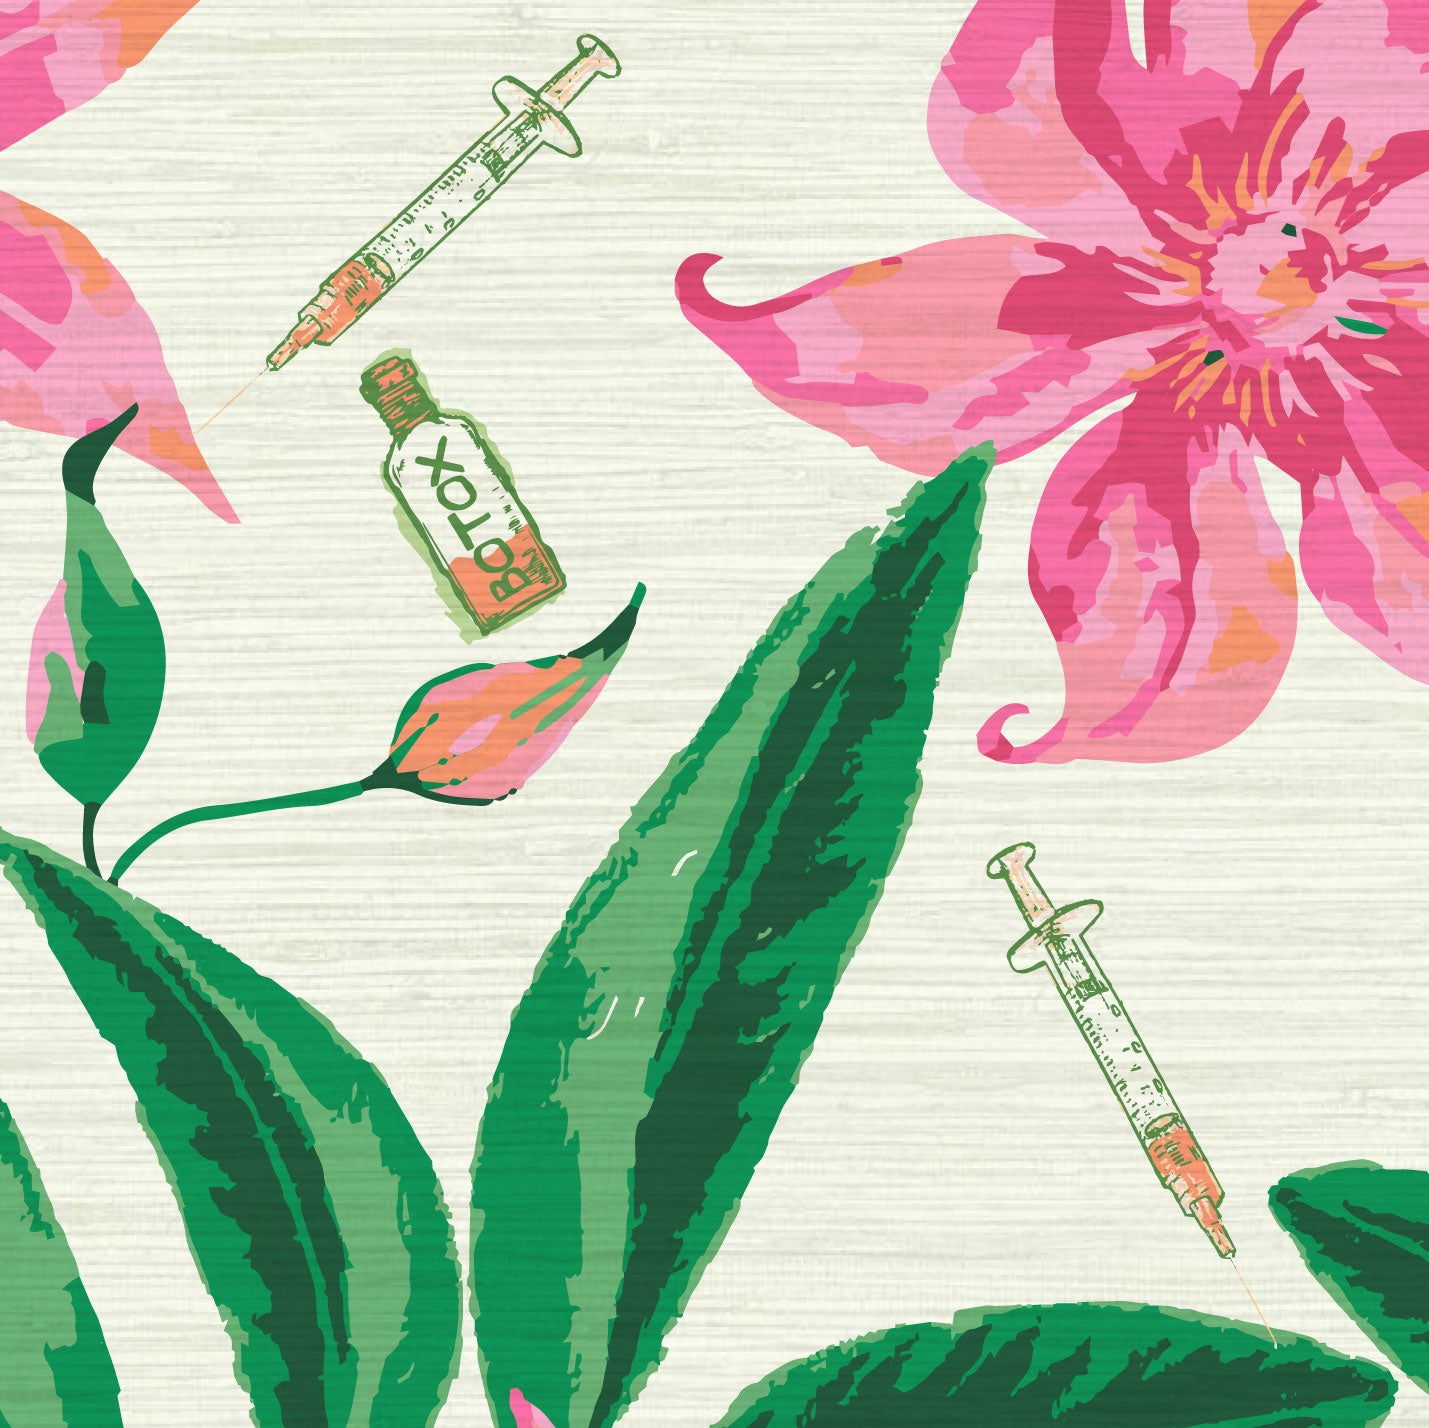 white based grasscloth printed wallpaper with oversized pink flowers and big green leafs with botox bottles syringes  Natural Textured Eco-Friendly Non-toxic High-quality  Sustainable practices Sustainability Interior Design Wall covering Bold Wallpaper Custom Tailor-made Retro chic Tropical Salon  Beauty Hair Garden jungle medspa botanical garden